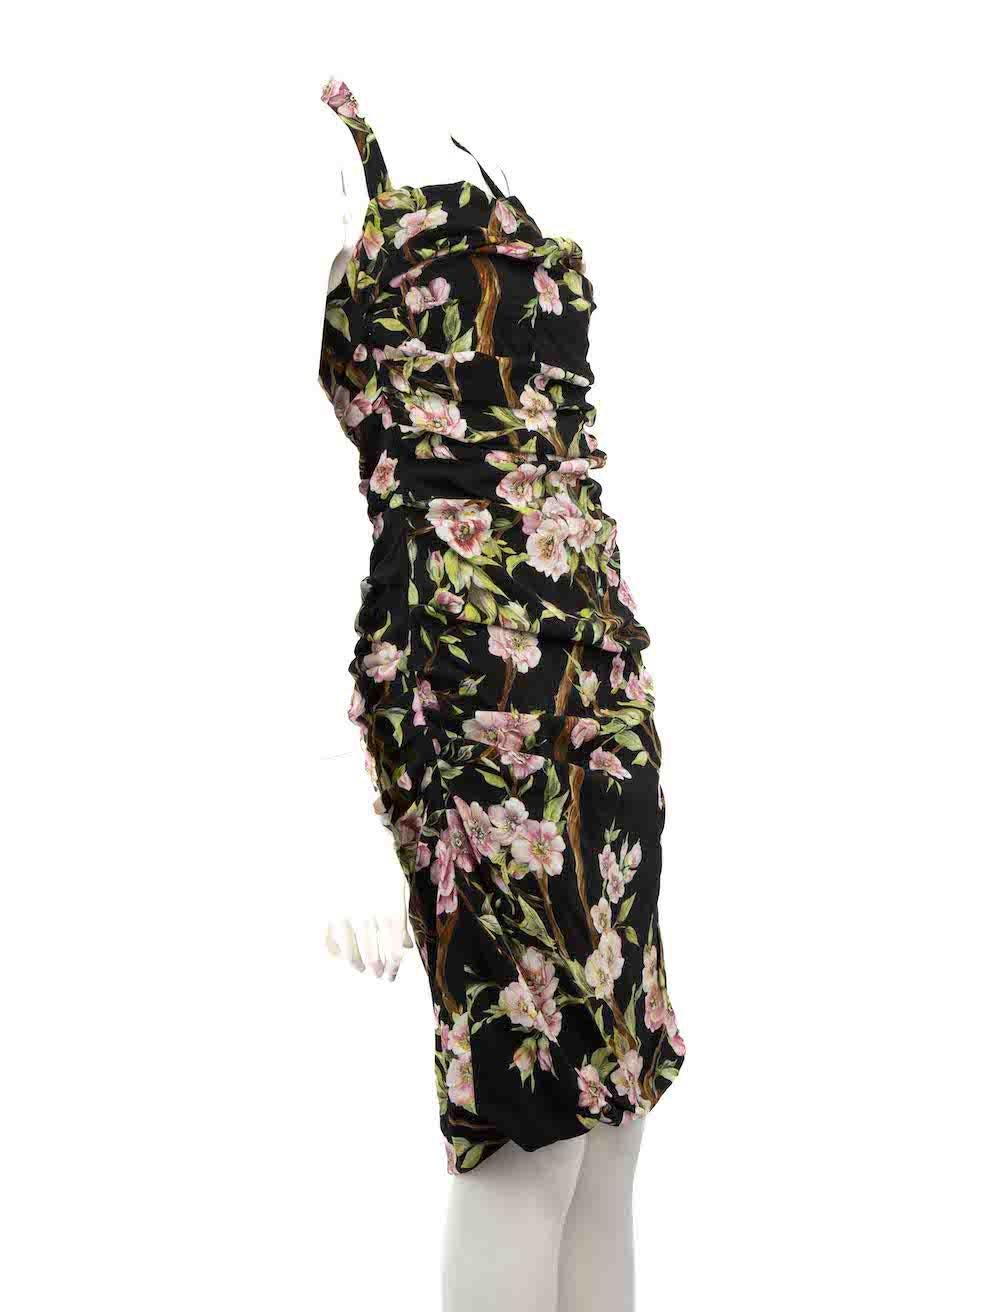 CONDITION is Very good. Minimal wear to dress is evident. Minimal wear to the rear top edge and neck straps with plucks to the weave on this used Dolce & Gabbana designer resale item.
 
 Details
 Black
 Viscose
 Dress
 Floral print
 Halterneck tie
